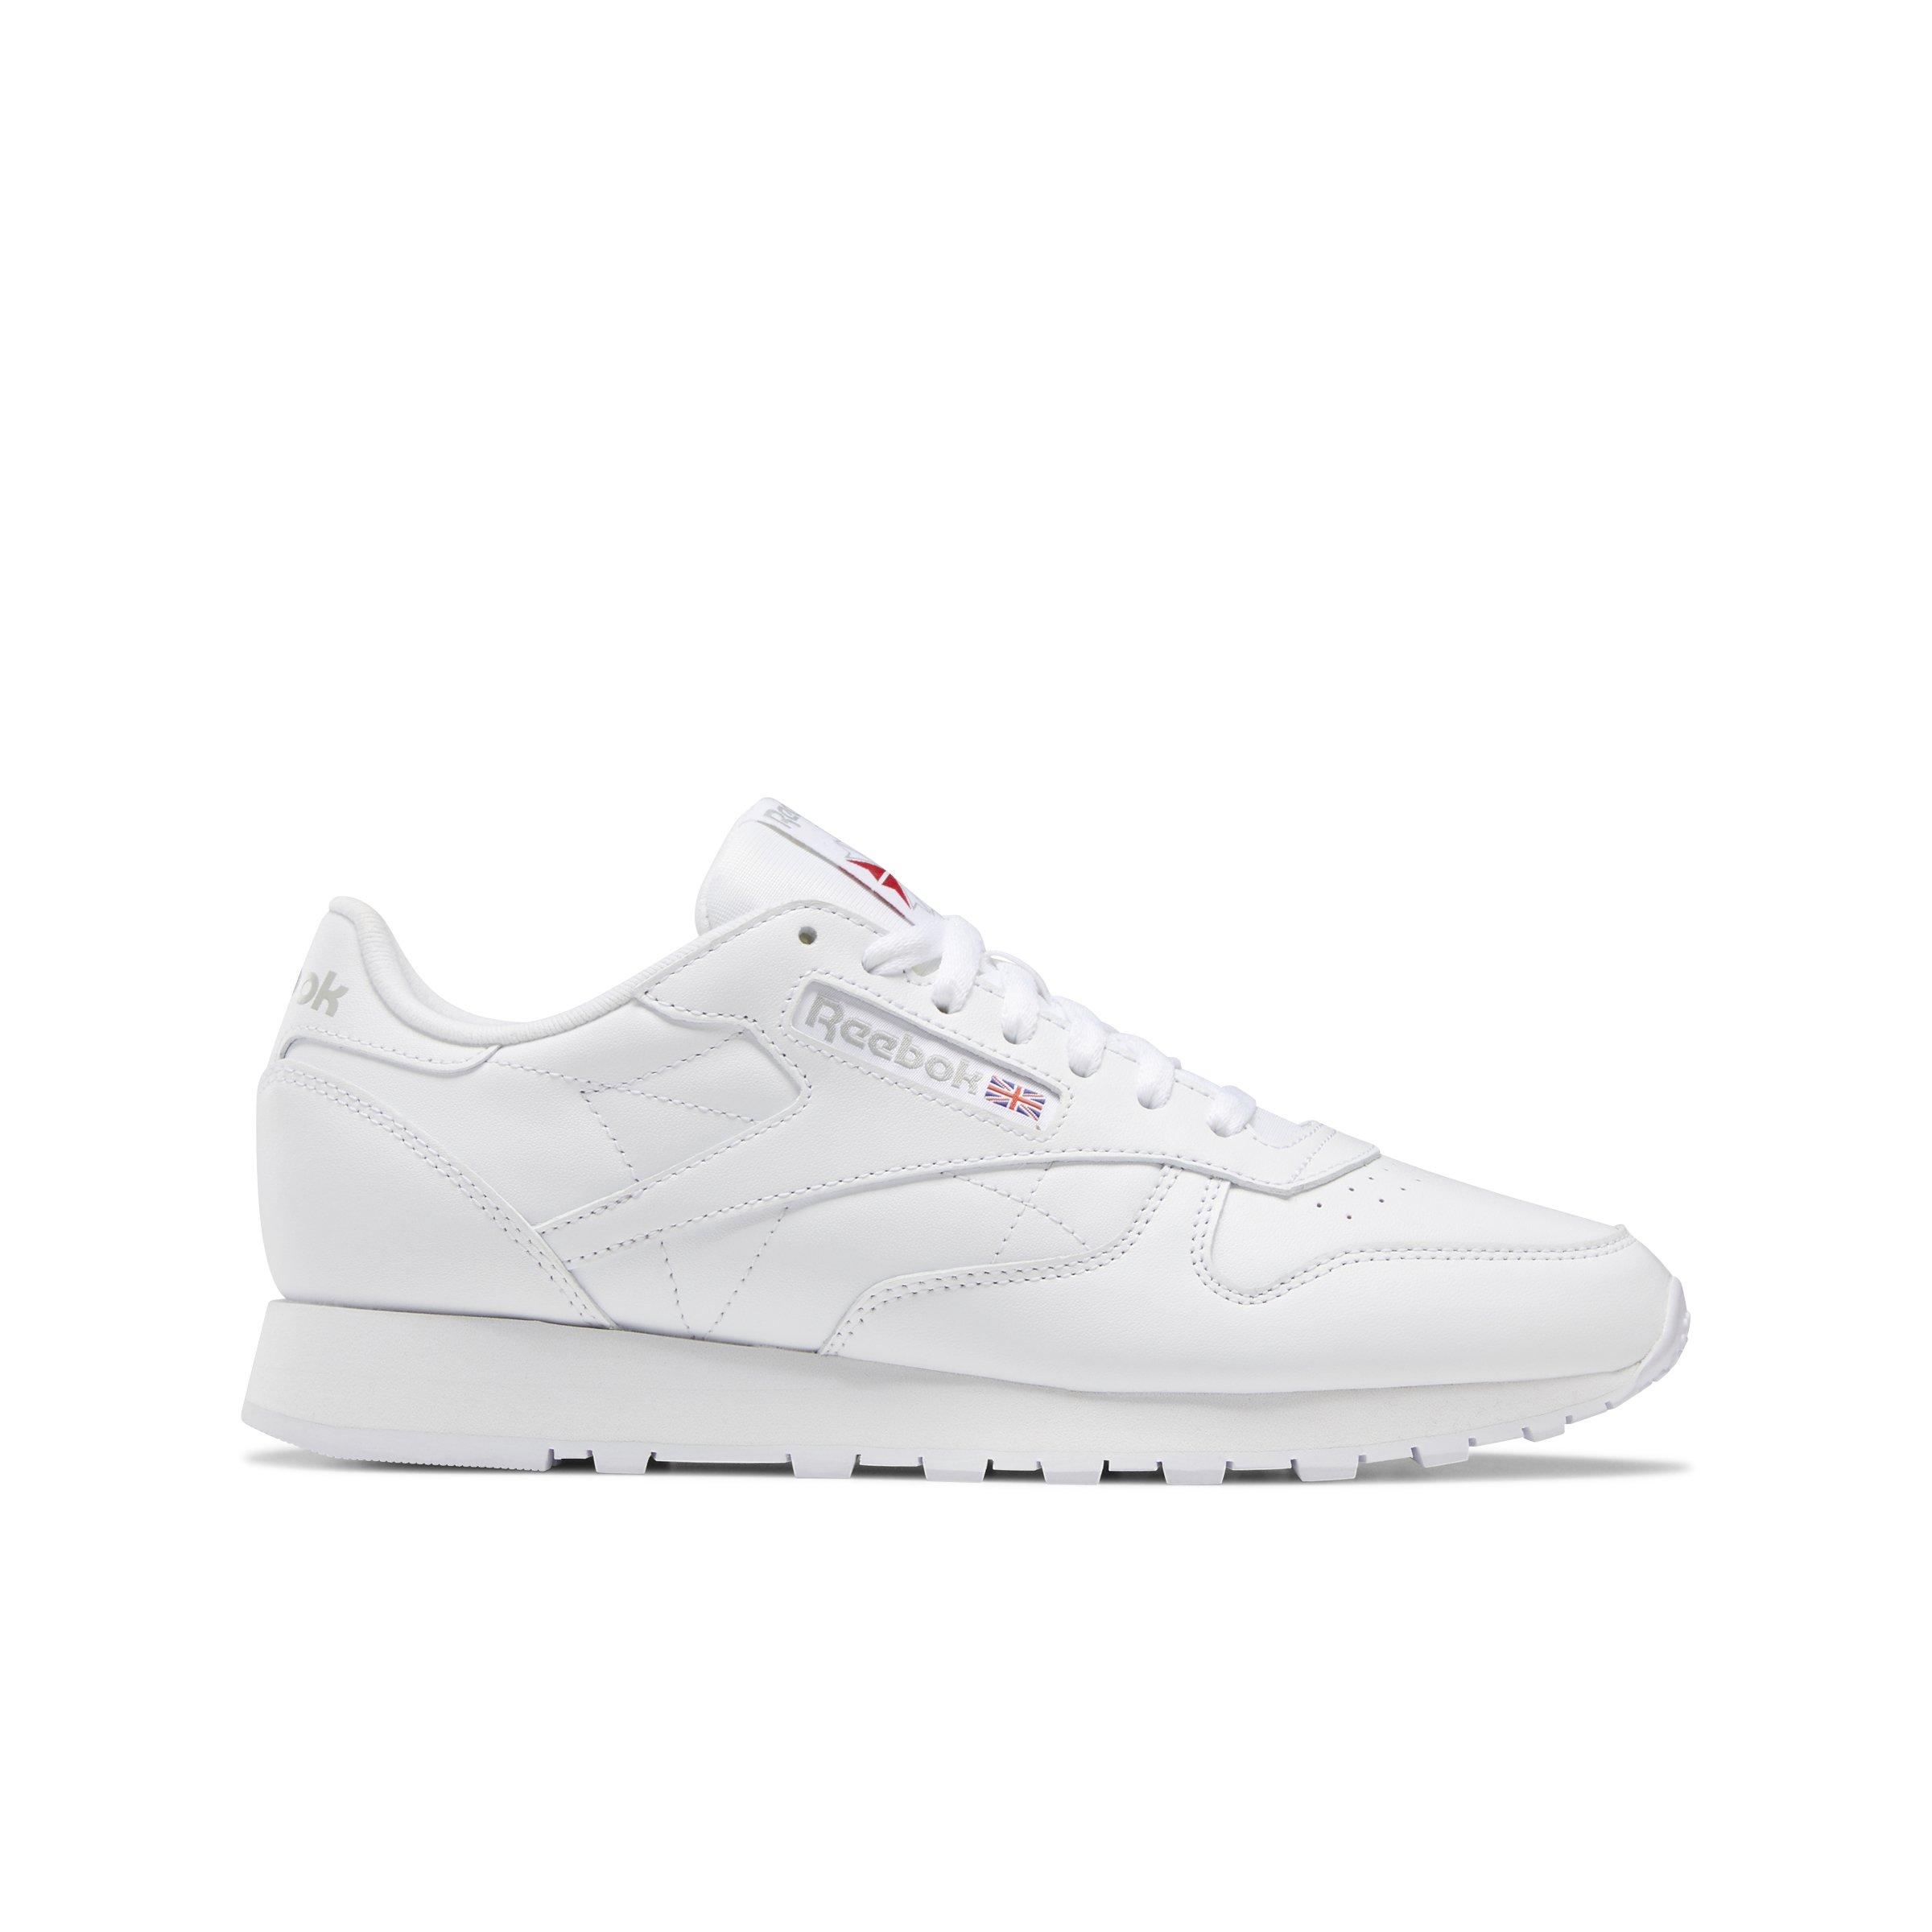 Classic Leather Shoes - Ftwr White / Ftwr White / Pure Grey 3